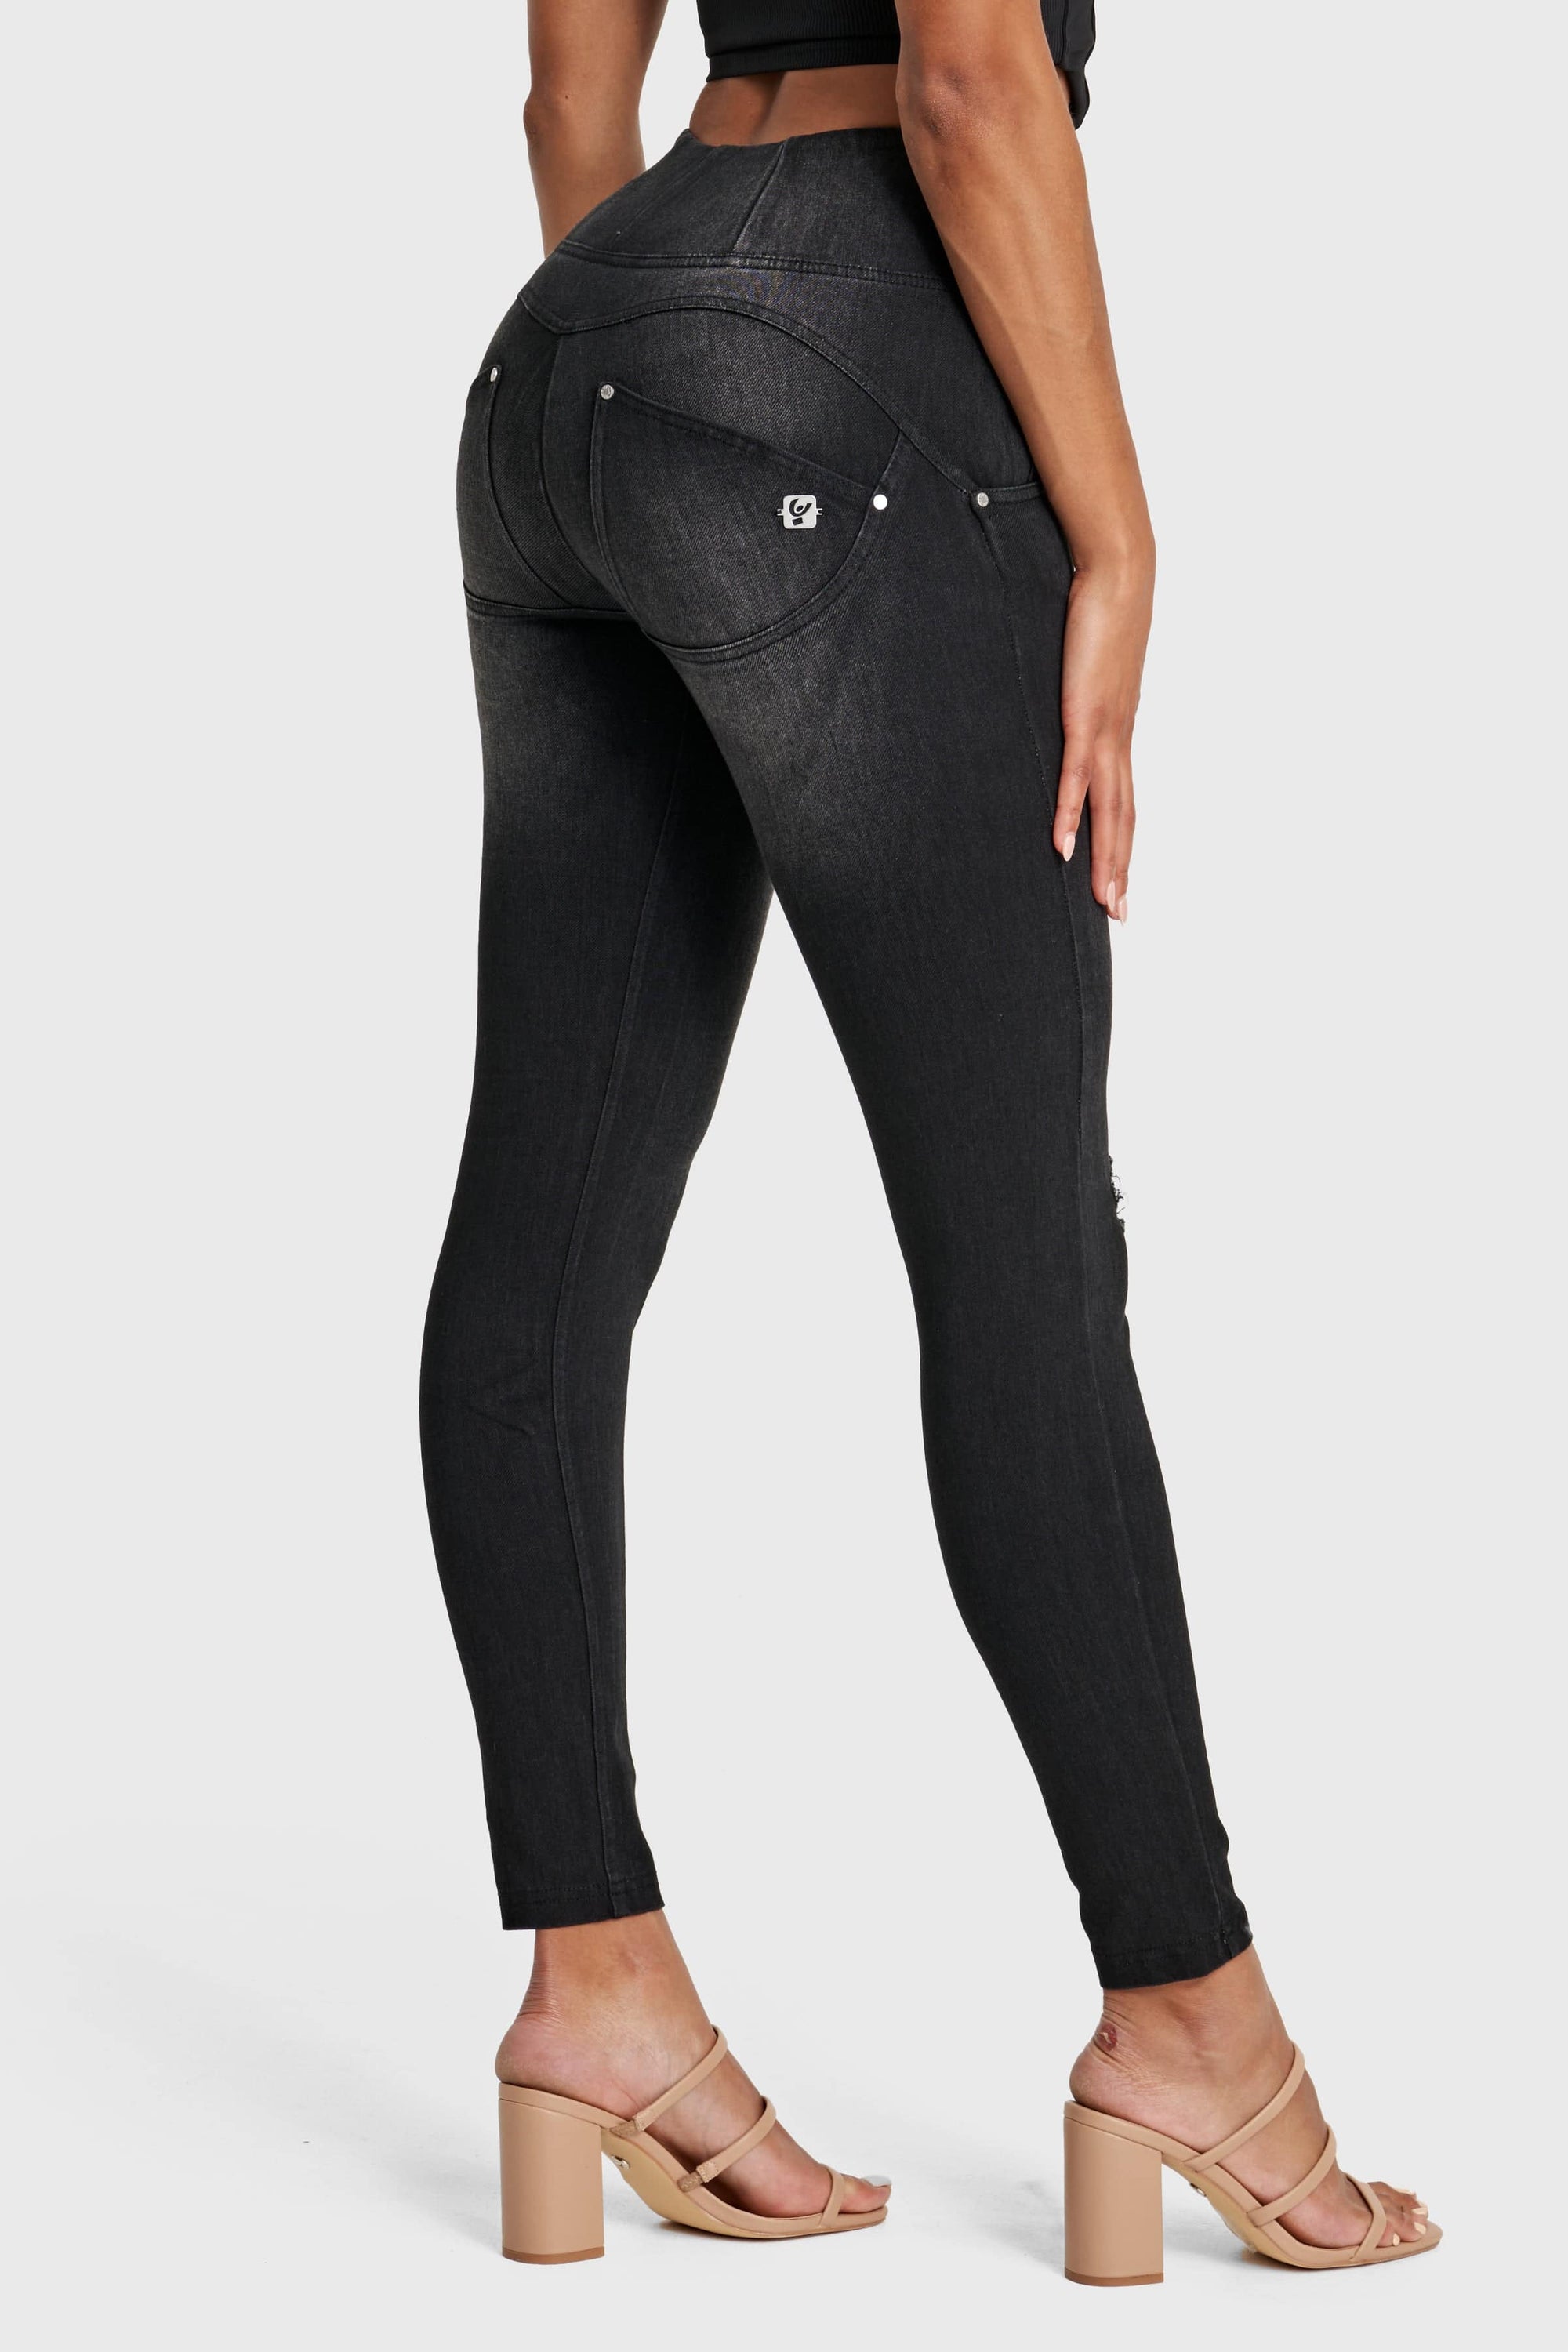 WR.UP® Snug Distressed Jeans - High Waisted - Full Length - Black + Black Stitching 8